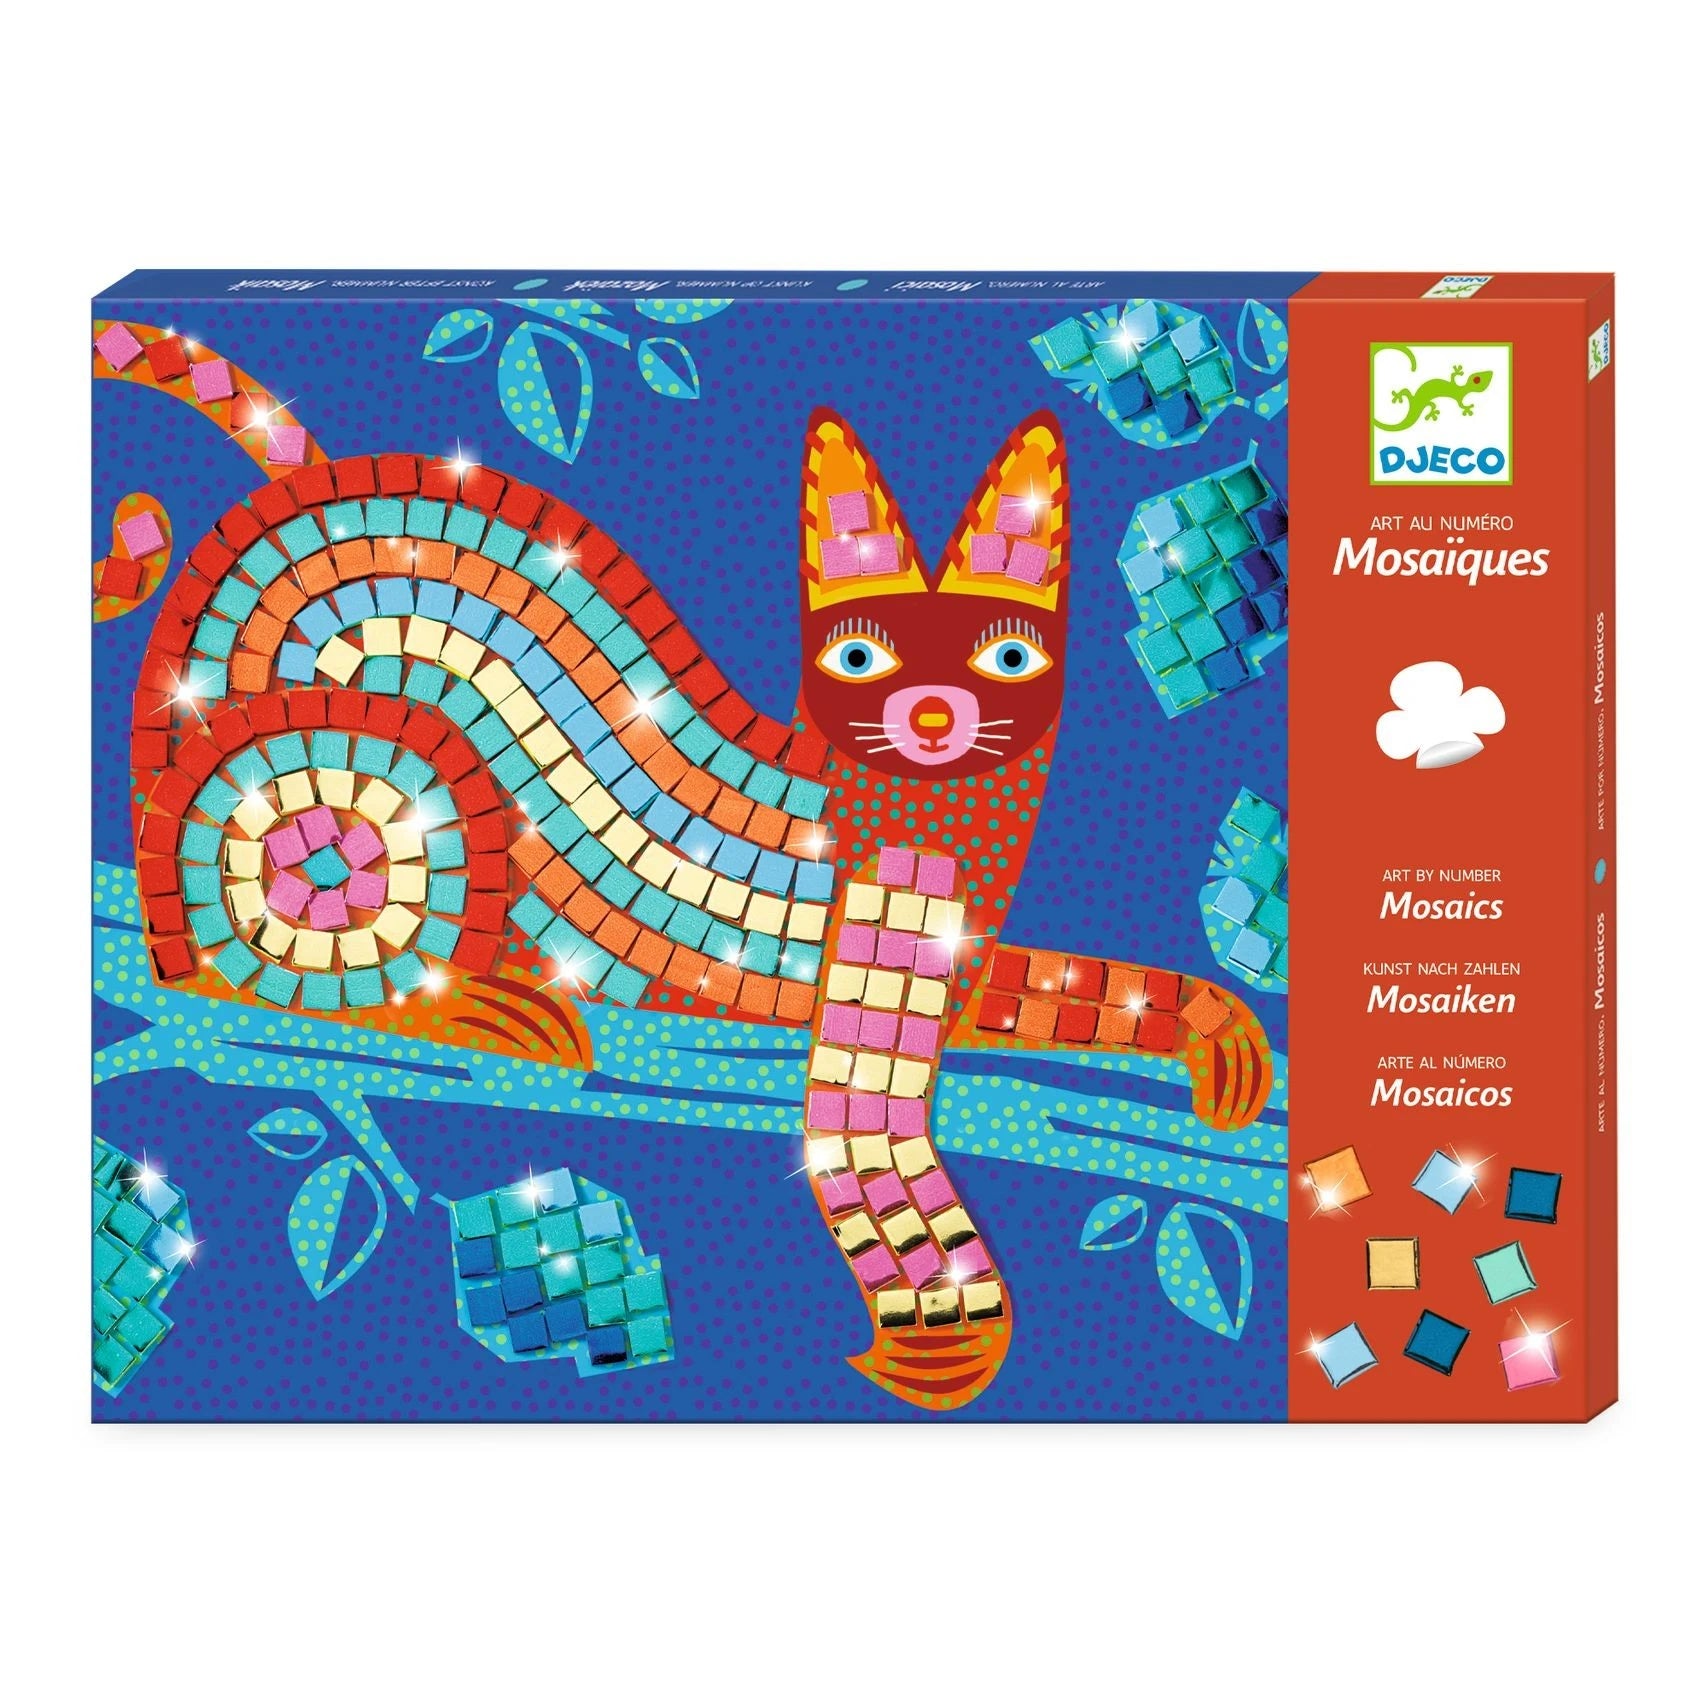 Mexican inspired art-by-numbers retail box